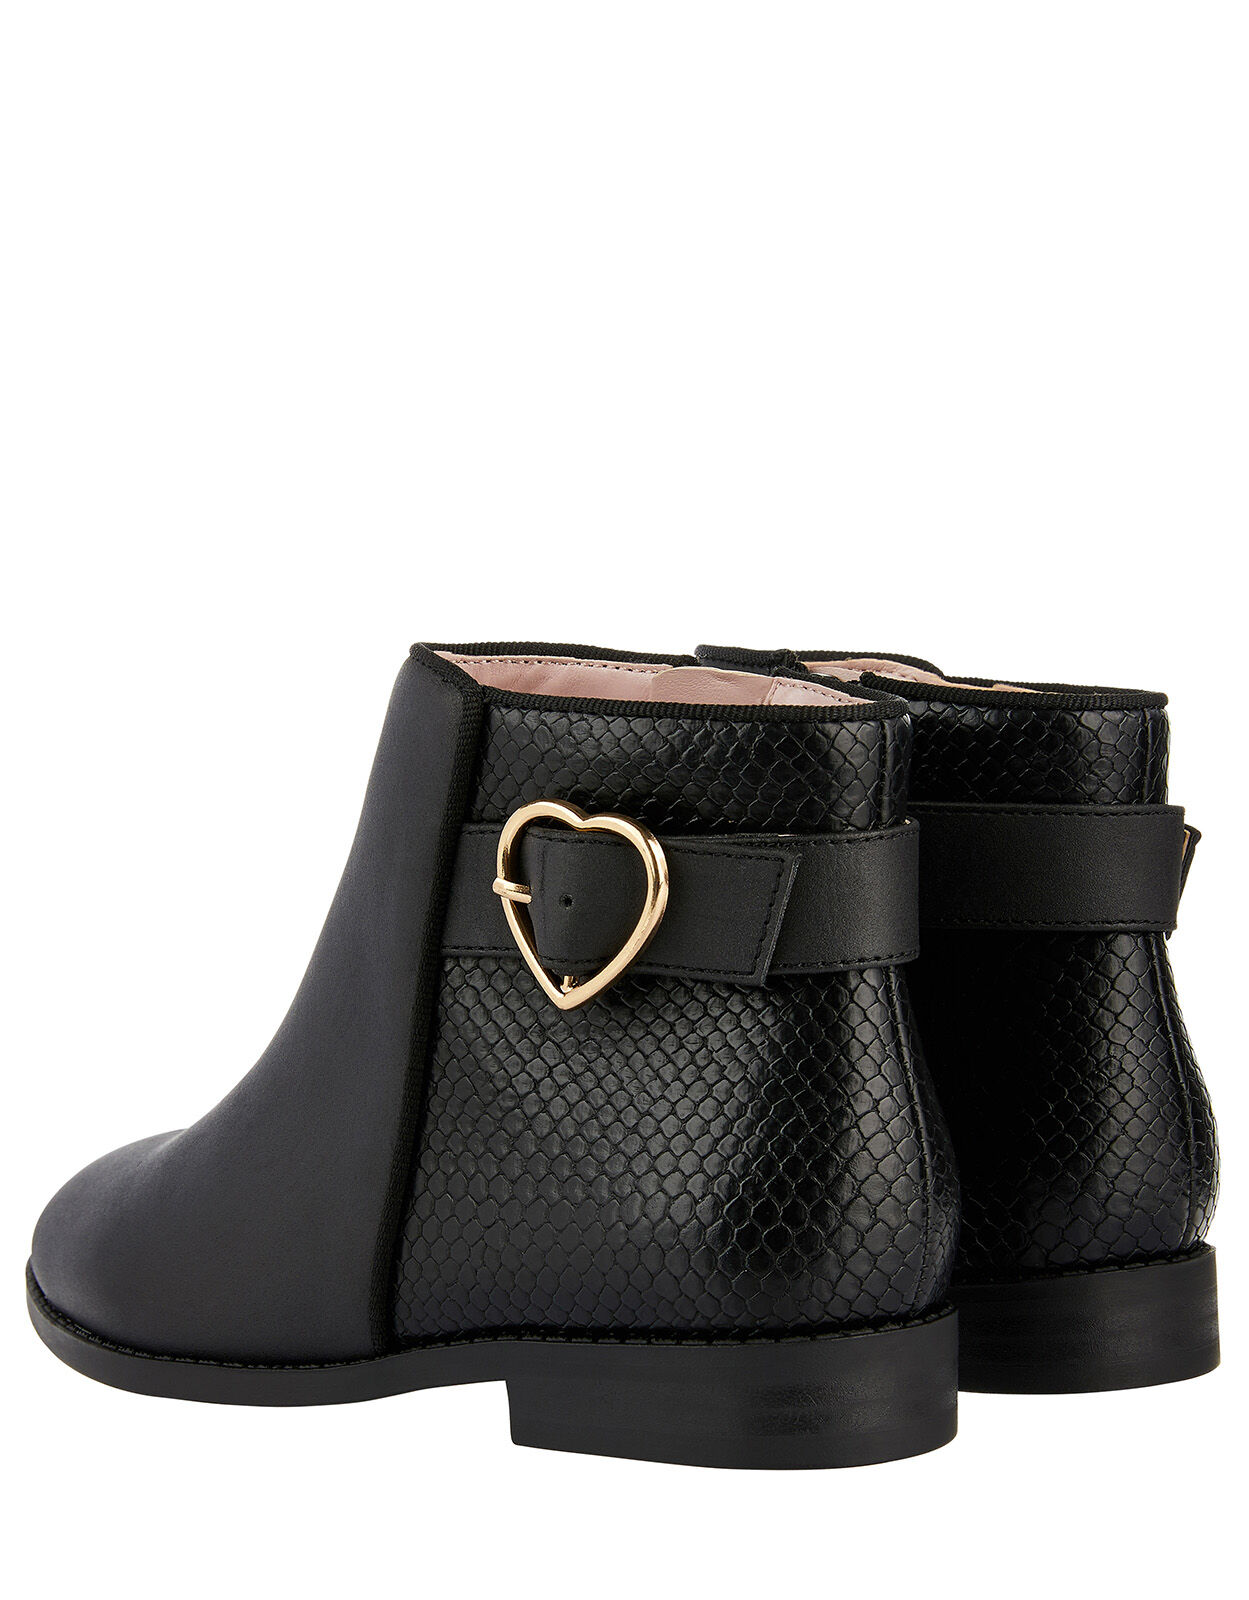 Mona Heart Buckle Ankle Boots Black 